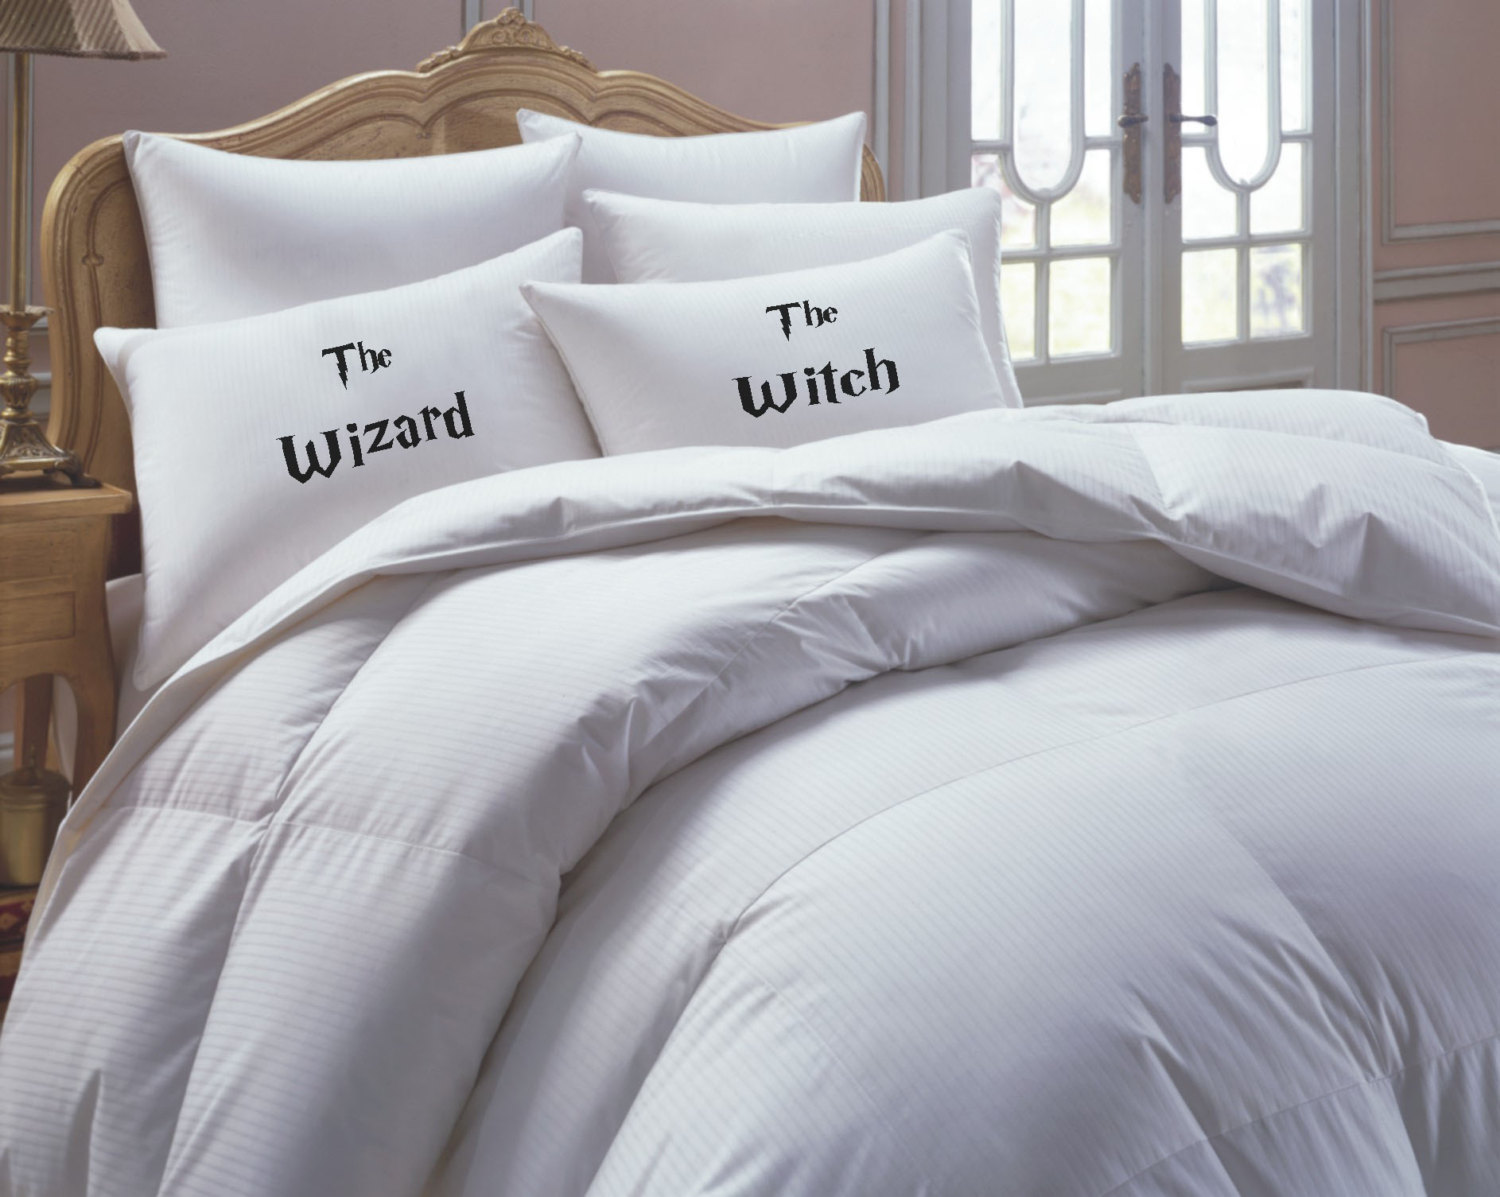 the wizard the witch harry potter pillowcases | via emmalinebride.com | 50+ Greatest Geeky Wedding Ideas of All Time